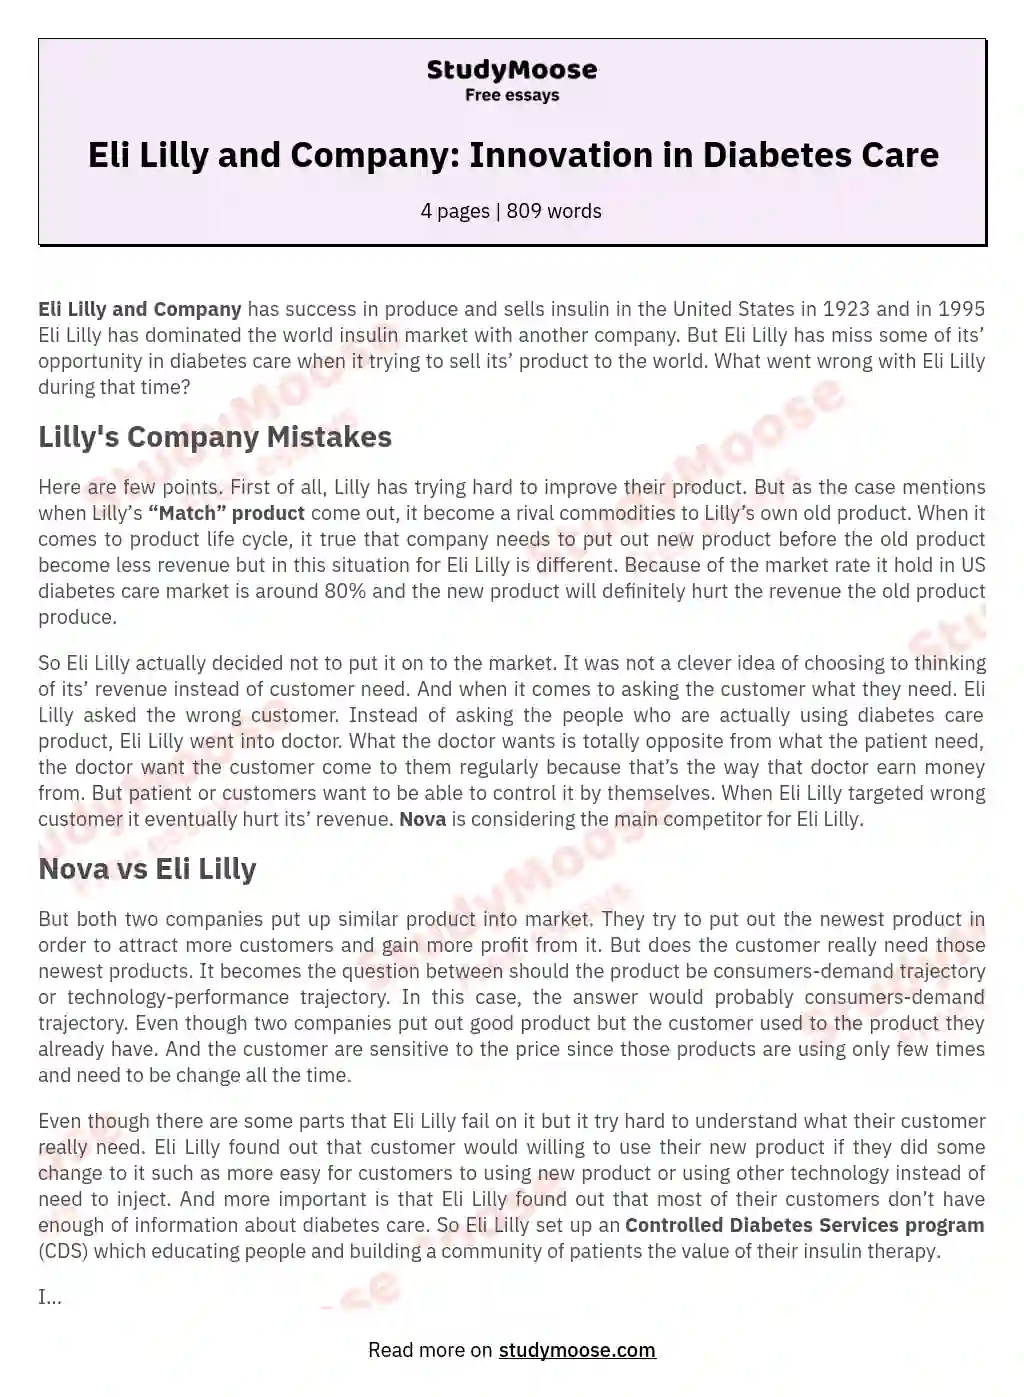 Eli Lilly and Company: Innovation in Diabetes Care essay